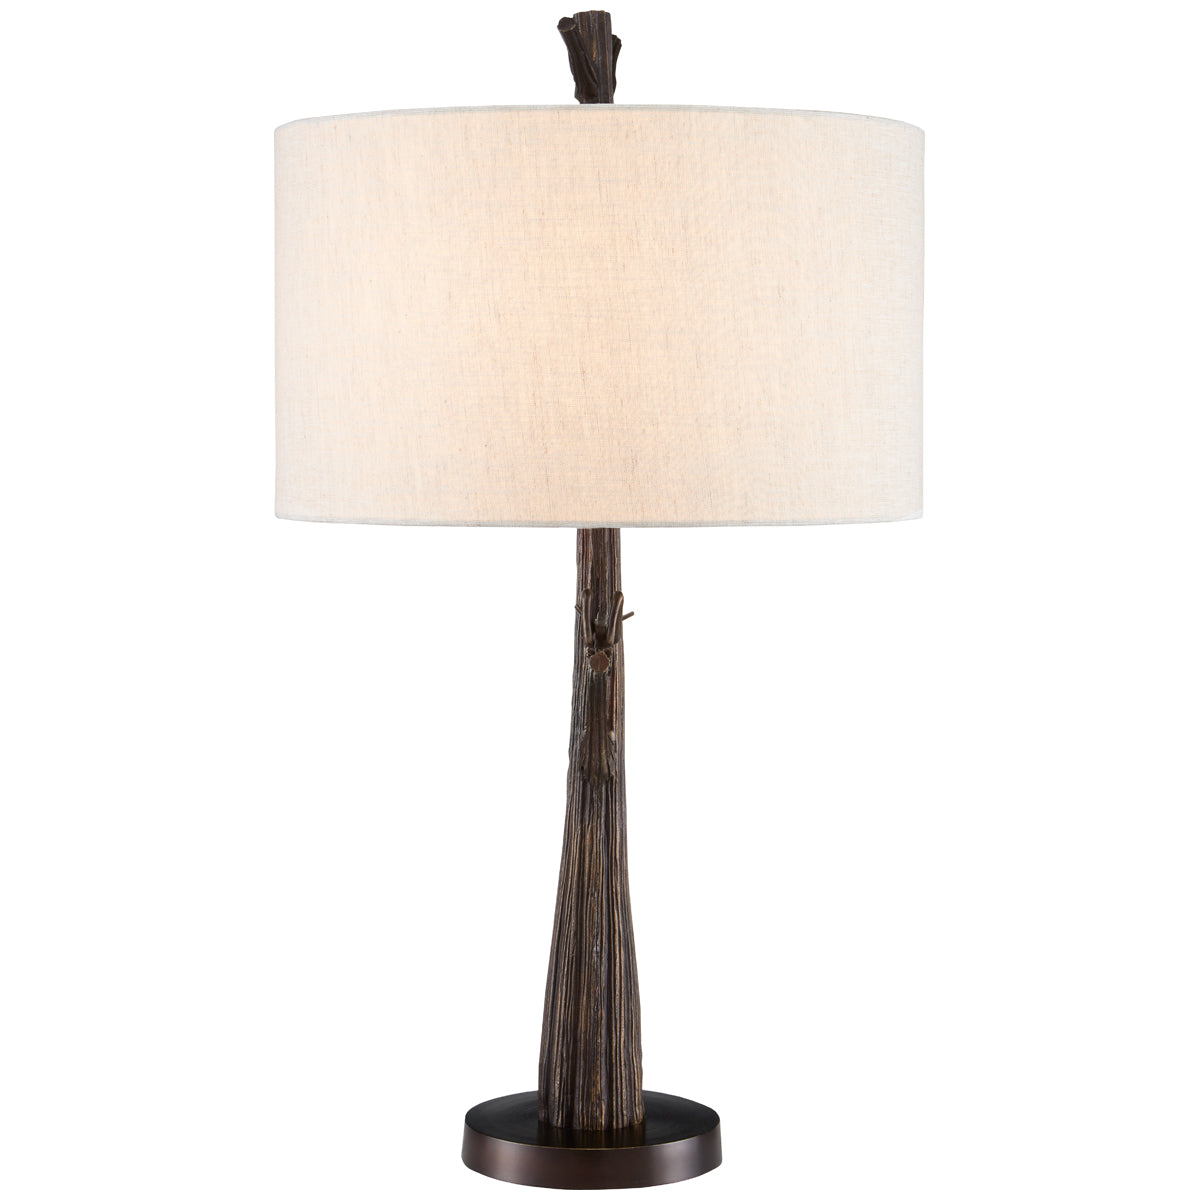 Currey and Company Grasshopper Table Lamp